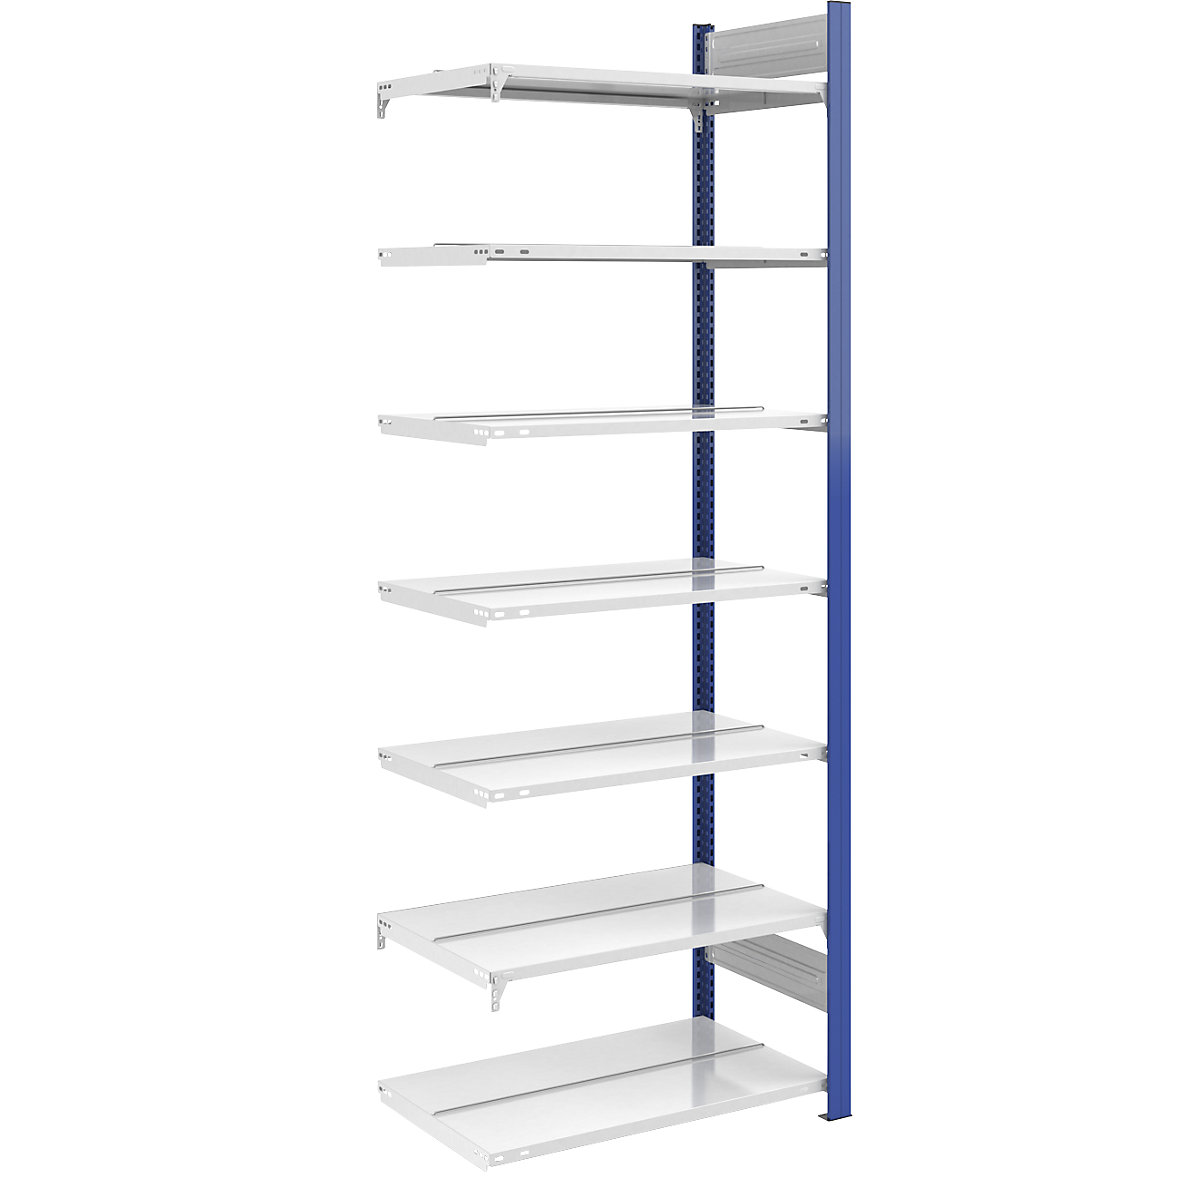 Boltless file shelving unit – hofe, double sided, height 2350 mm, WxD 750 x 600 mm, extension shelf unit, blue / grey-5